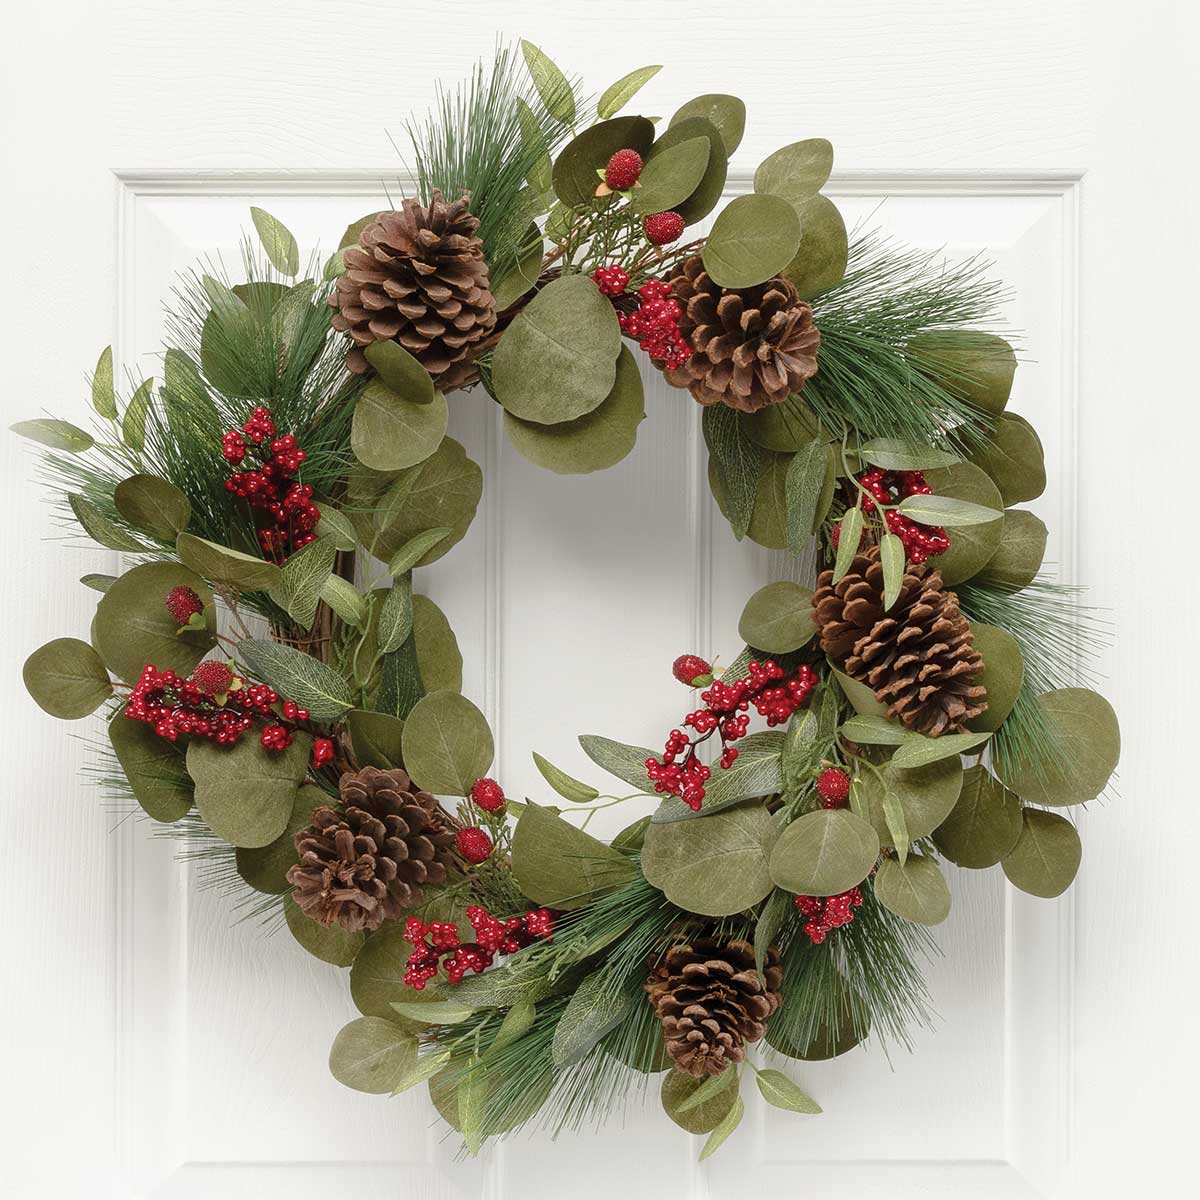 MIXED EUCALYPTUS WREATH WITH WIRED STEMS